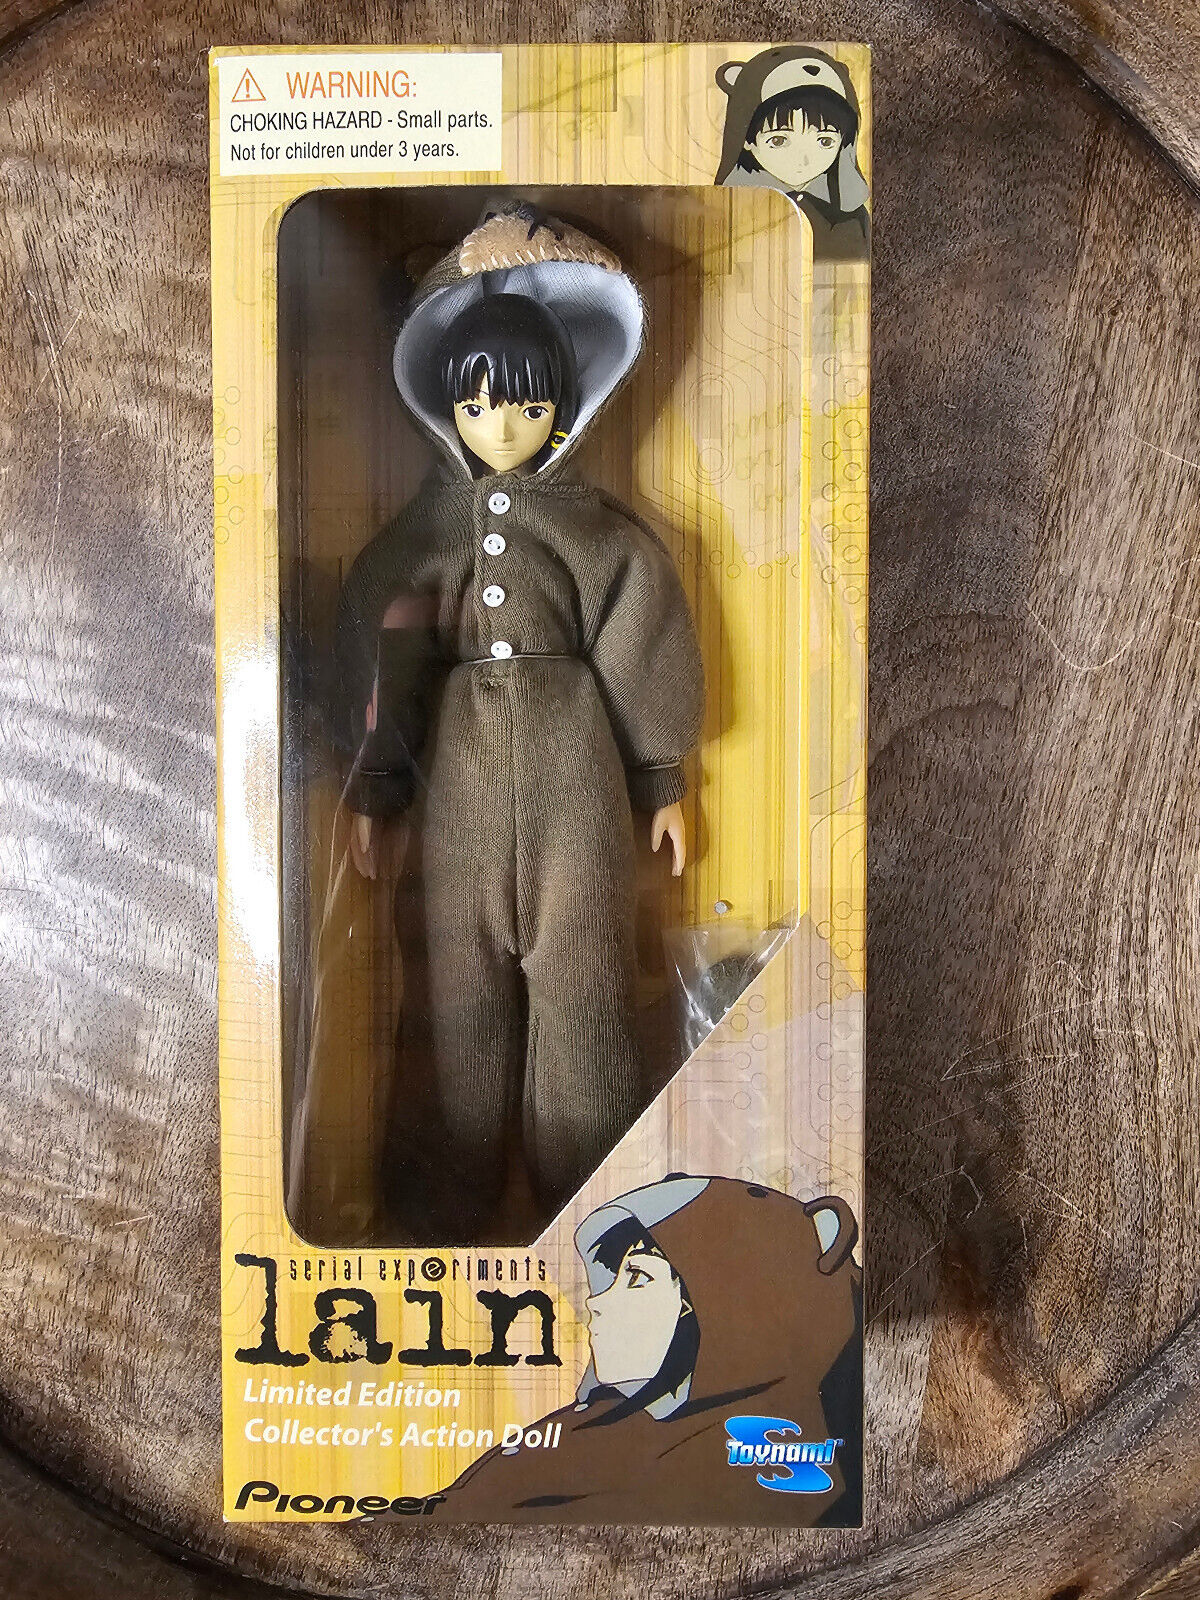 Serial Experiments Lain Limited Edition Collector\'s Action Doll Teddy Bear